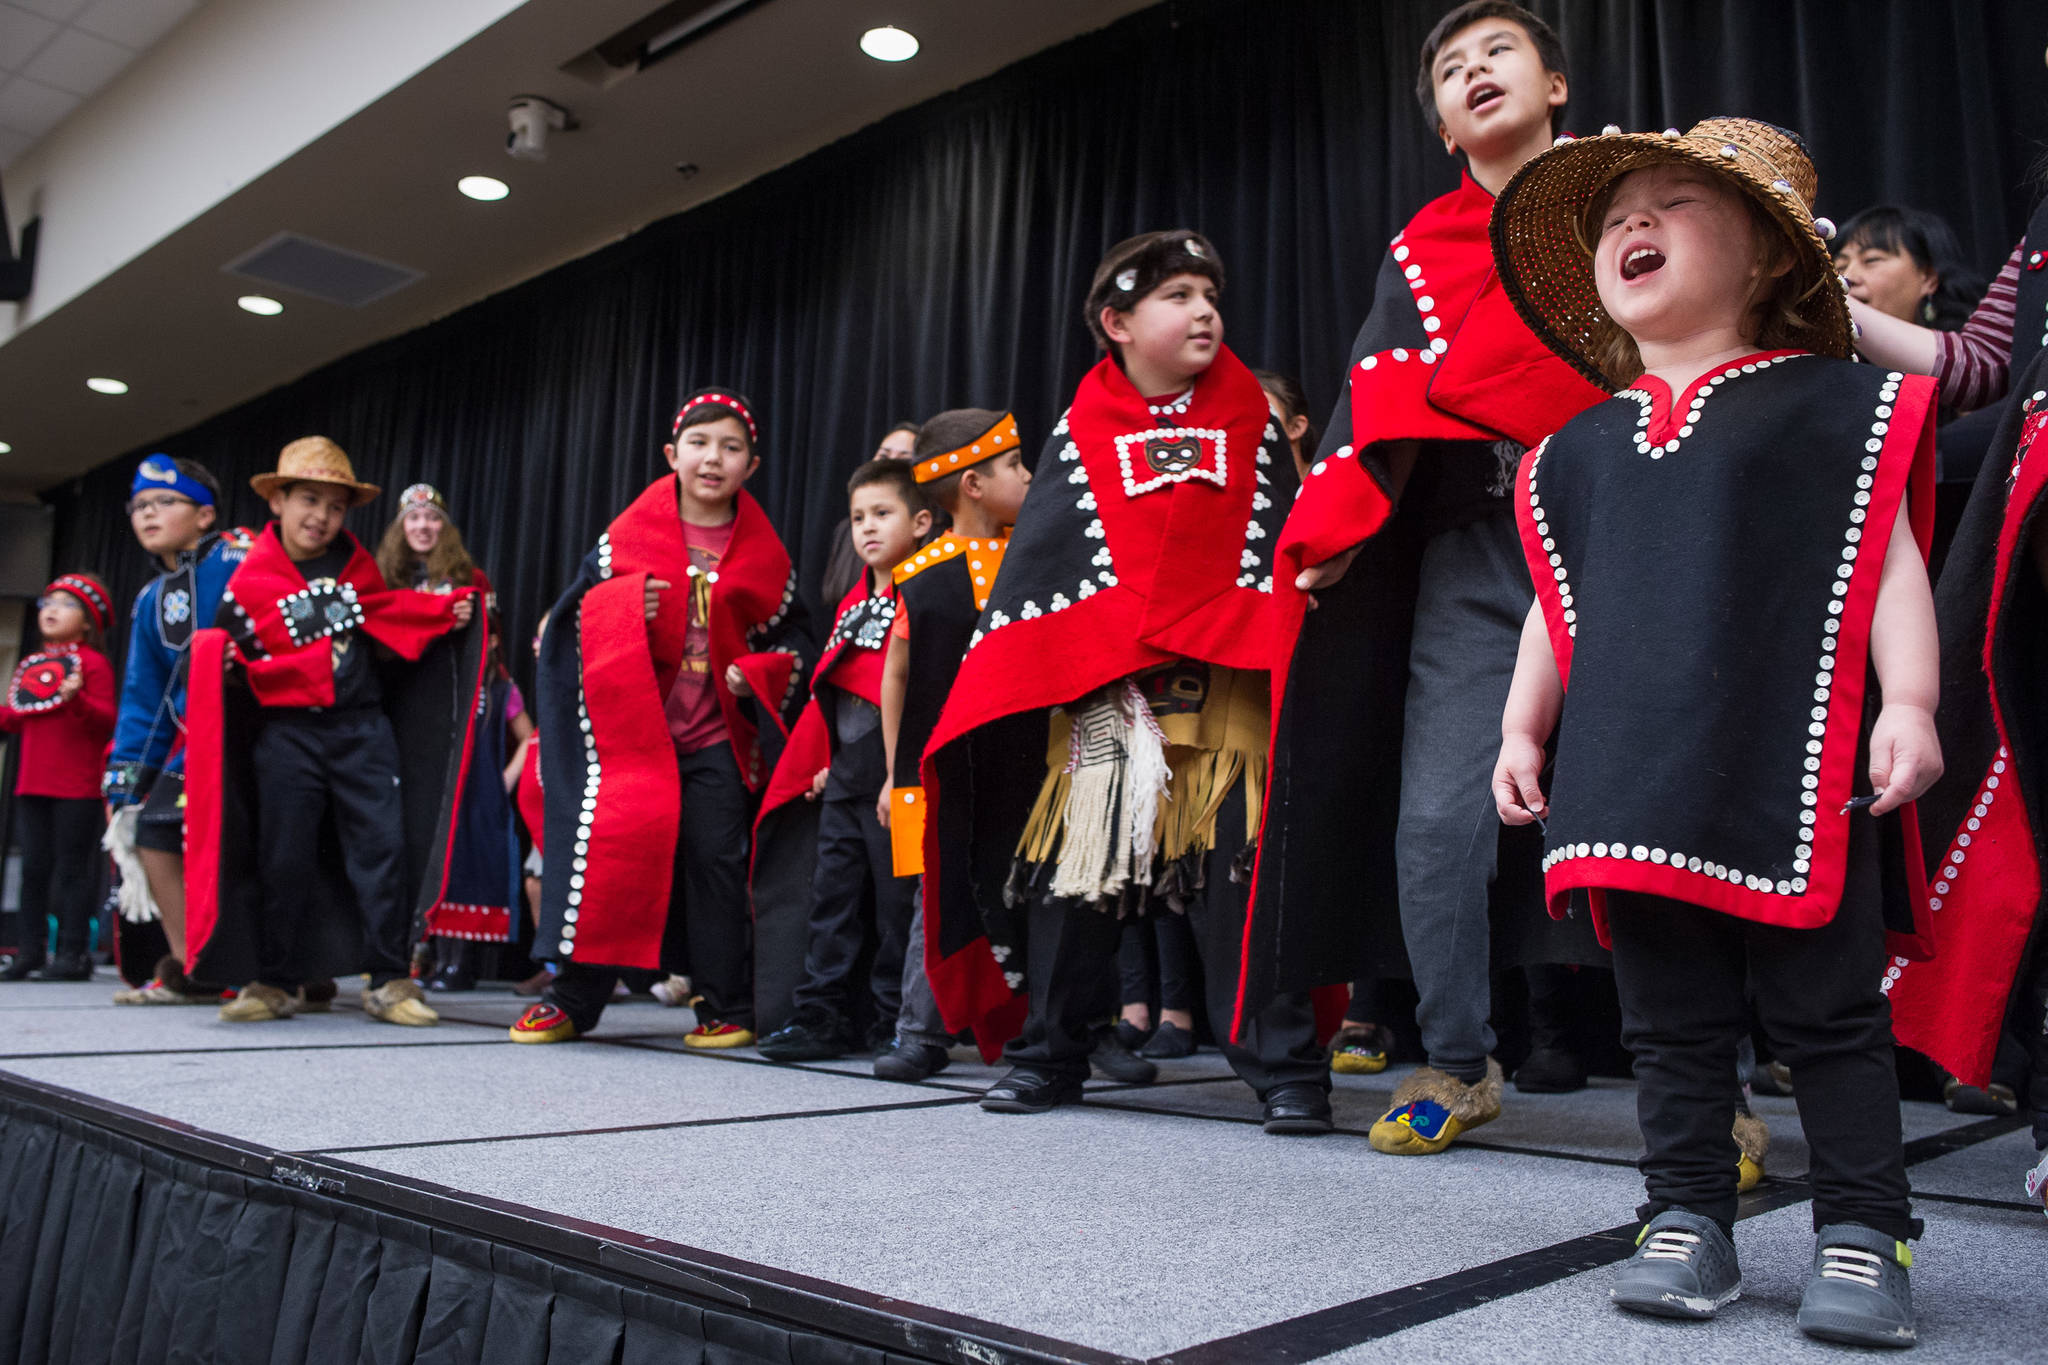 Natalie Soto, 2, helps sing with the All Nations Children Dancers as Juneau residents celebrate Indigenous Peoples Day at Elizabeth Peratrovich Hall on Monday, Oct. 9, 2017. (Michael Penn | Juneau Empire)